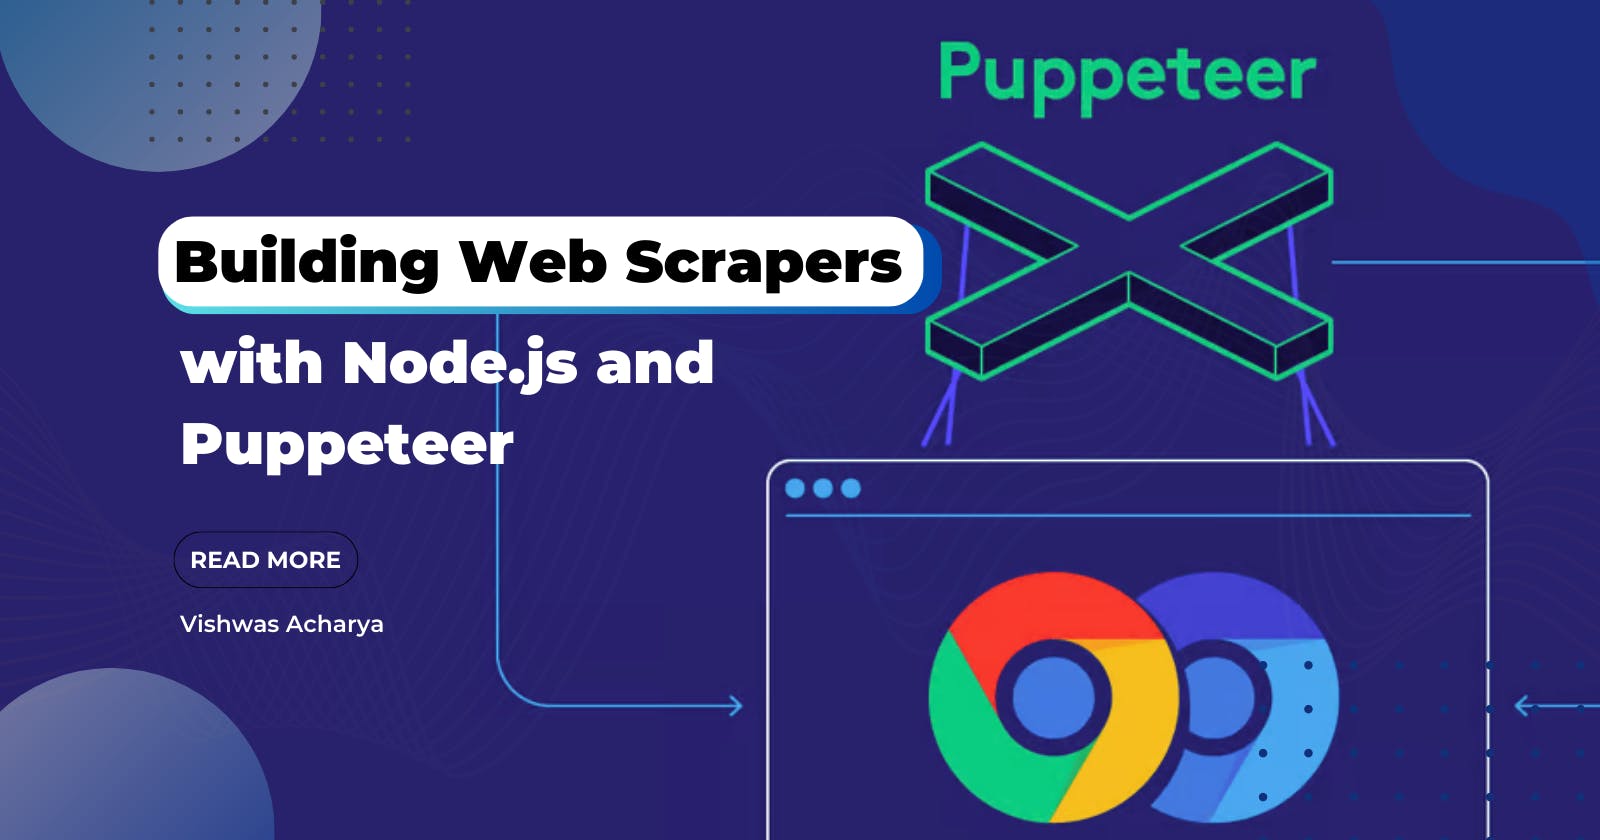 Building Web Scrapers with Node.js and Puppeteer